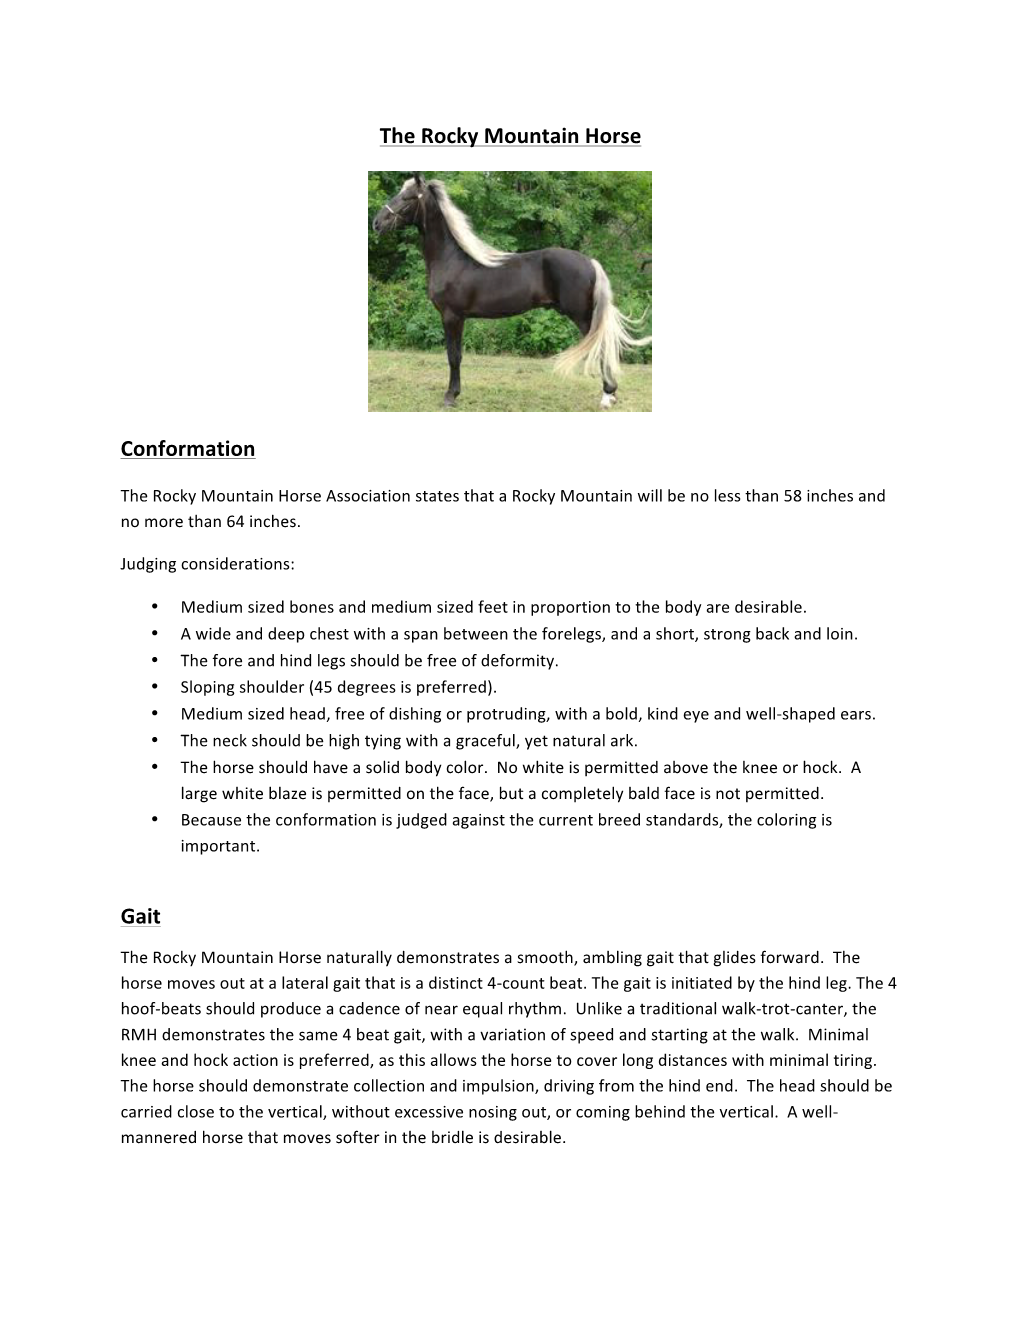 The Rocky Mountain Horse Conformation Gait